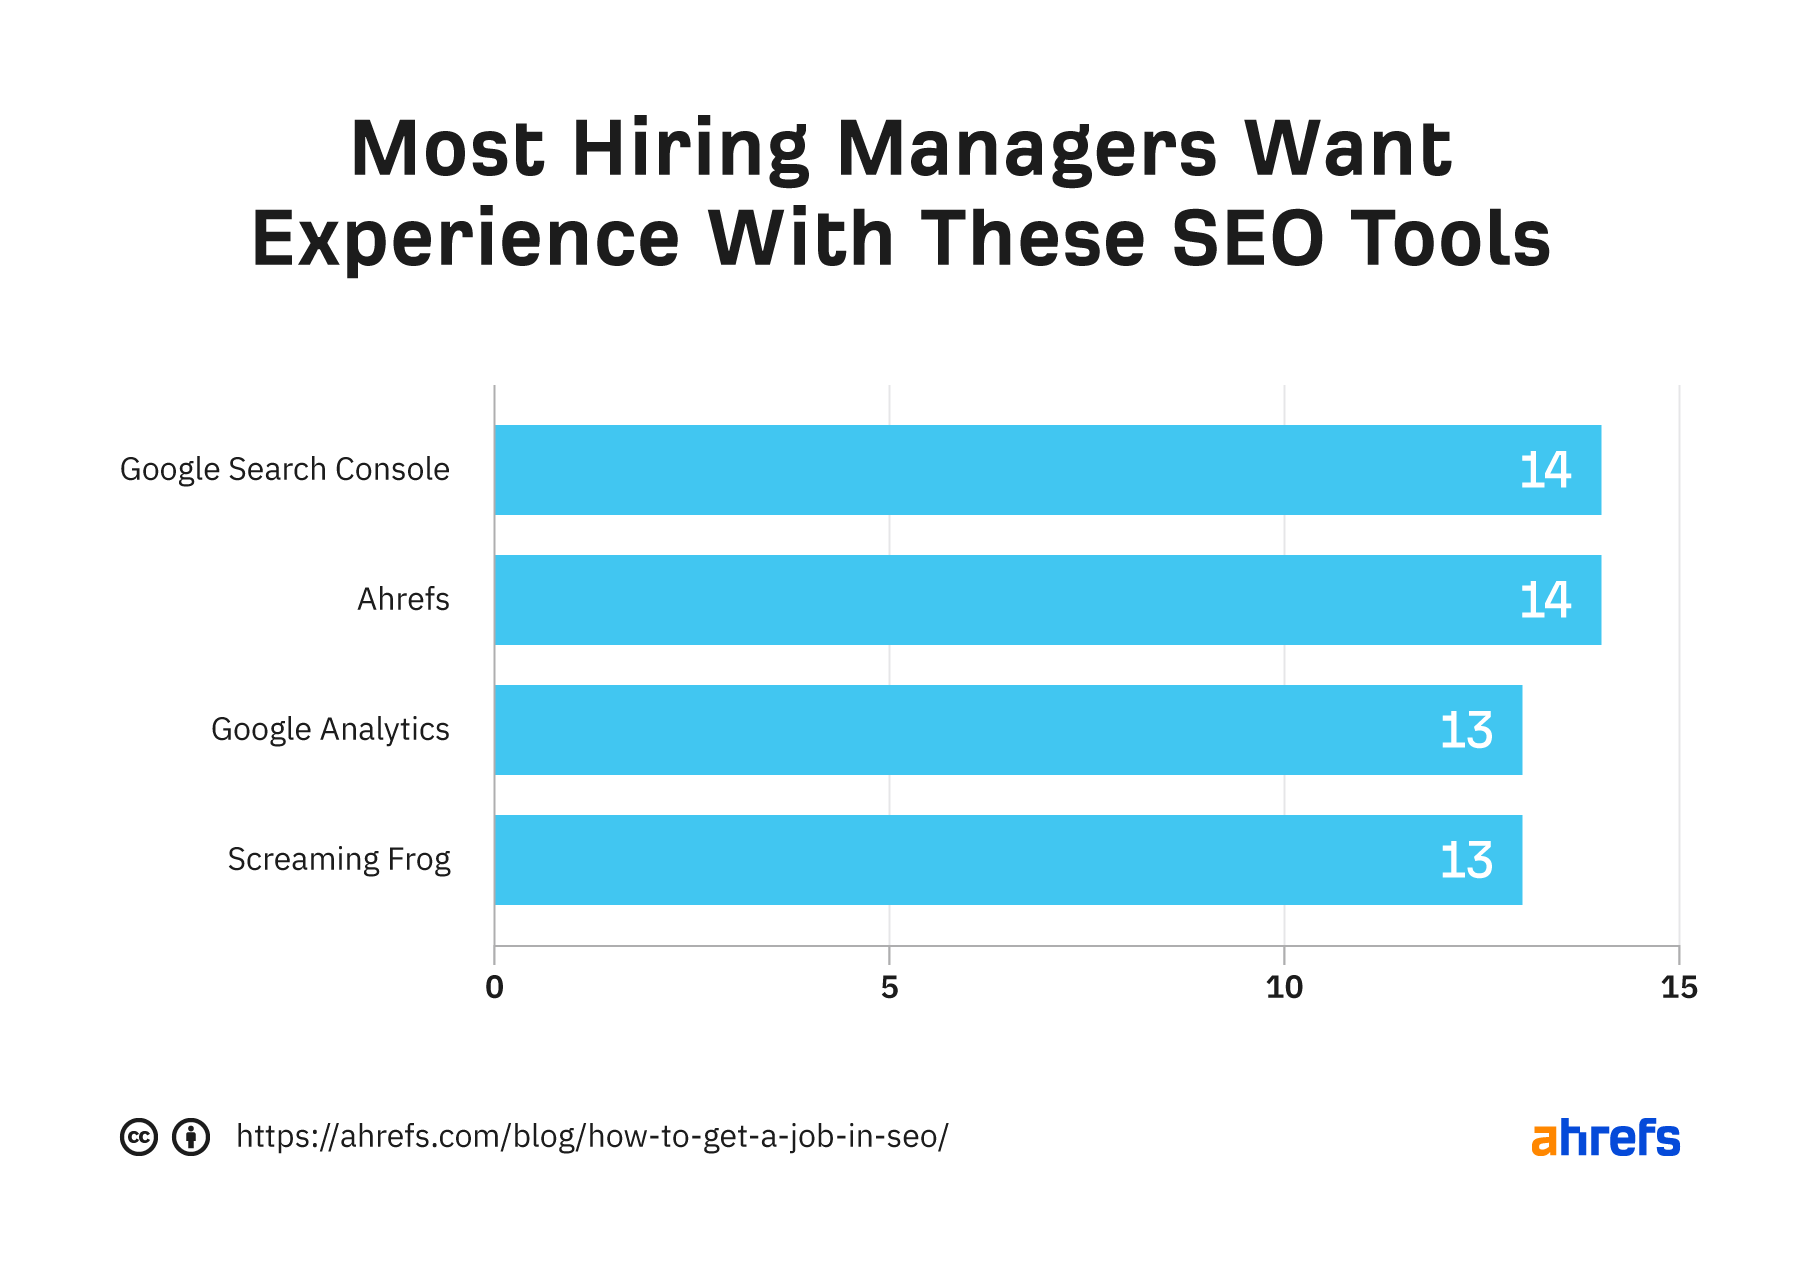 Most hiring managers want experience with these SEO tools
